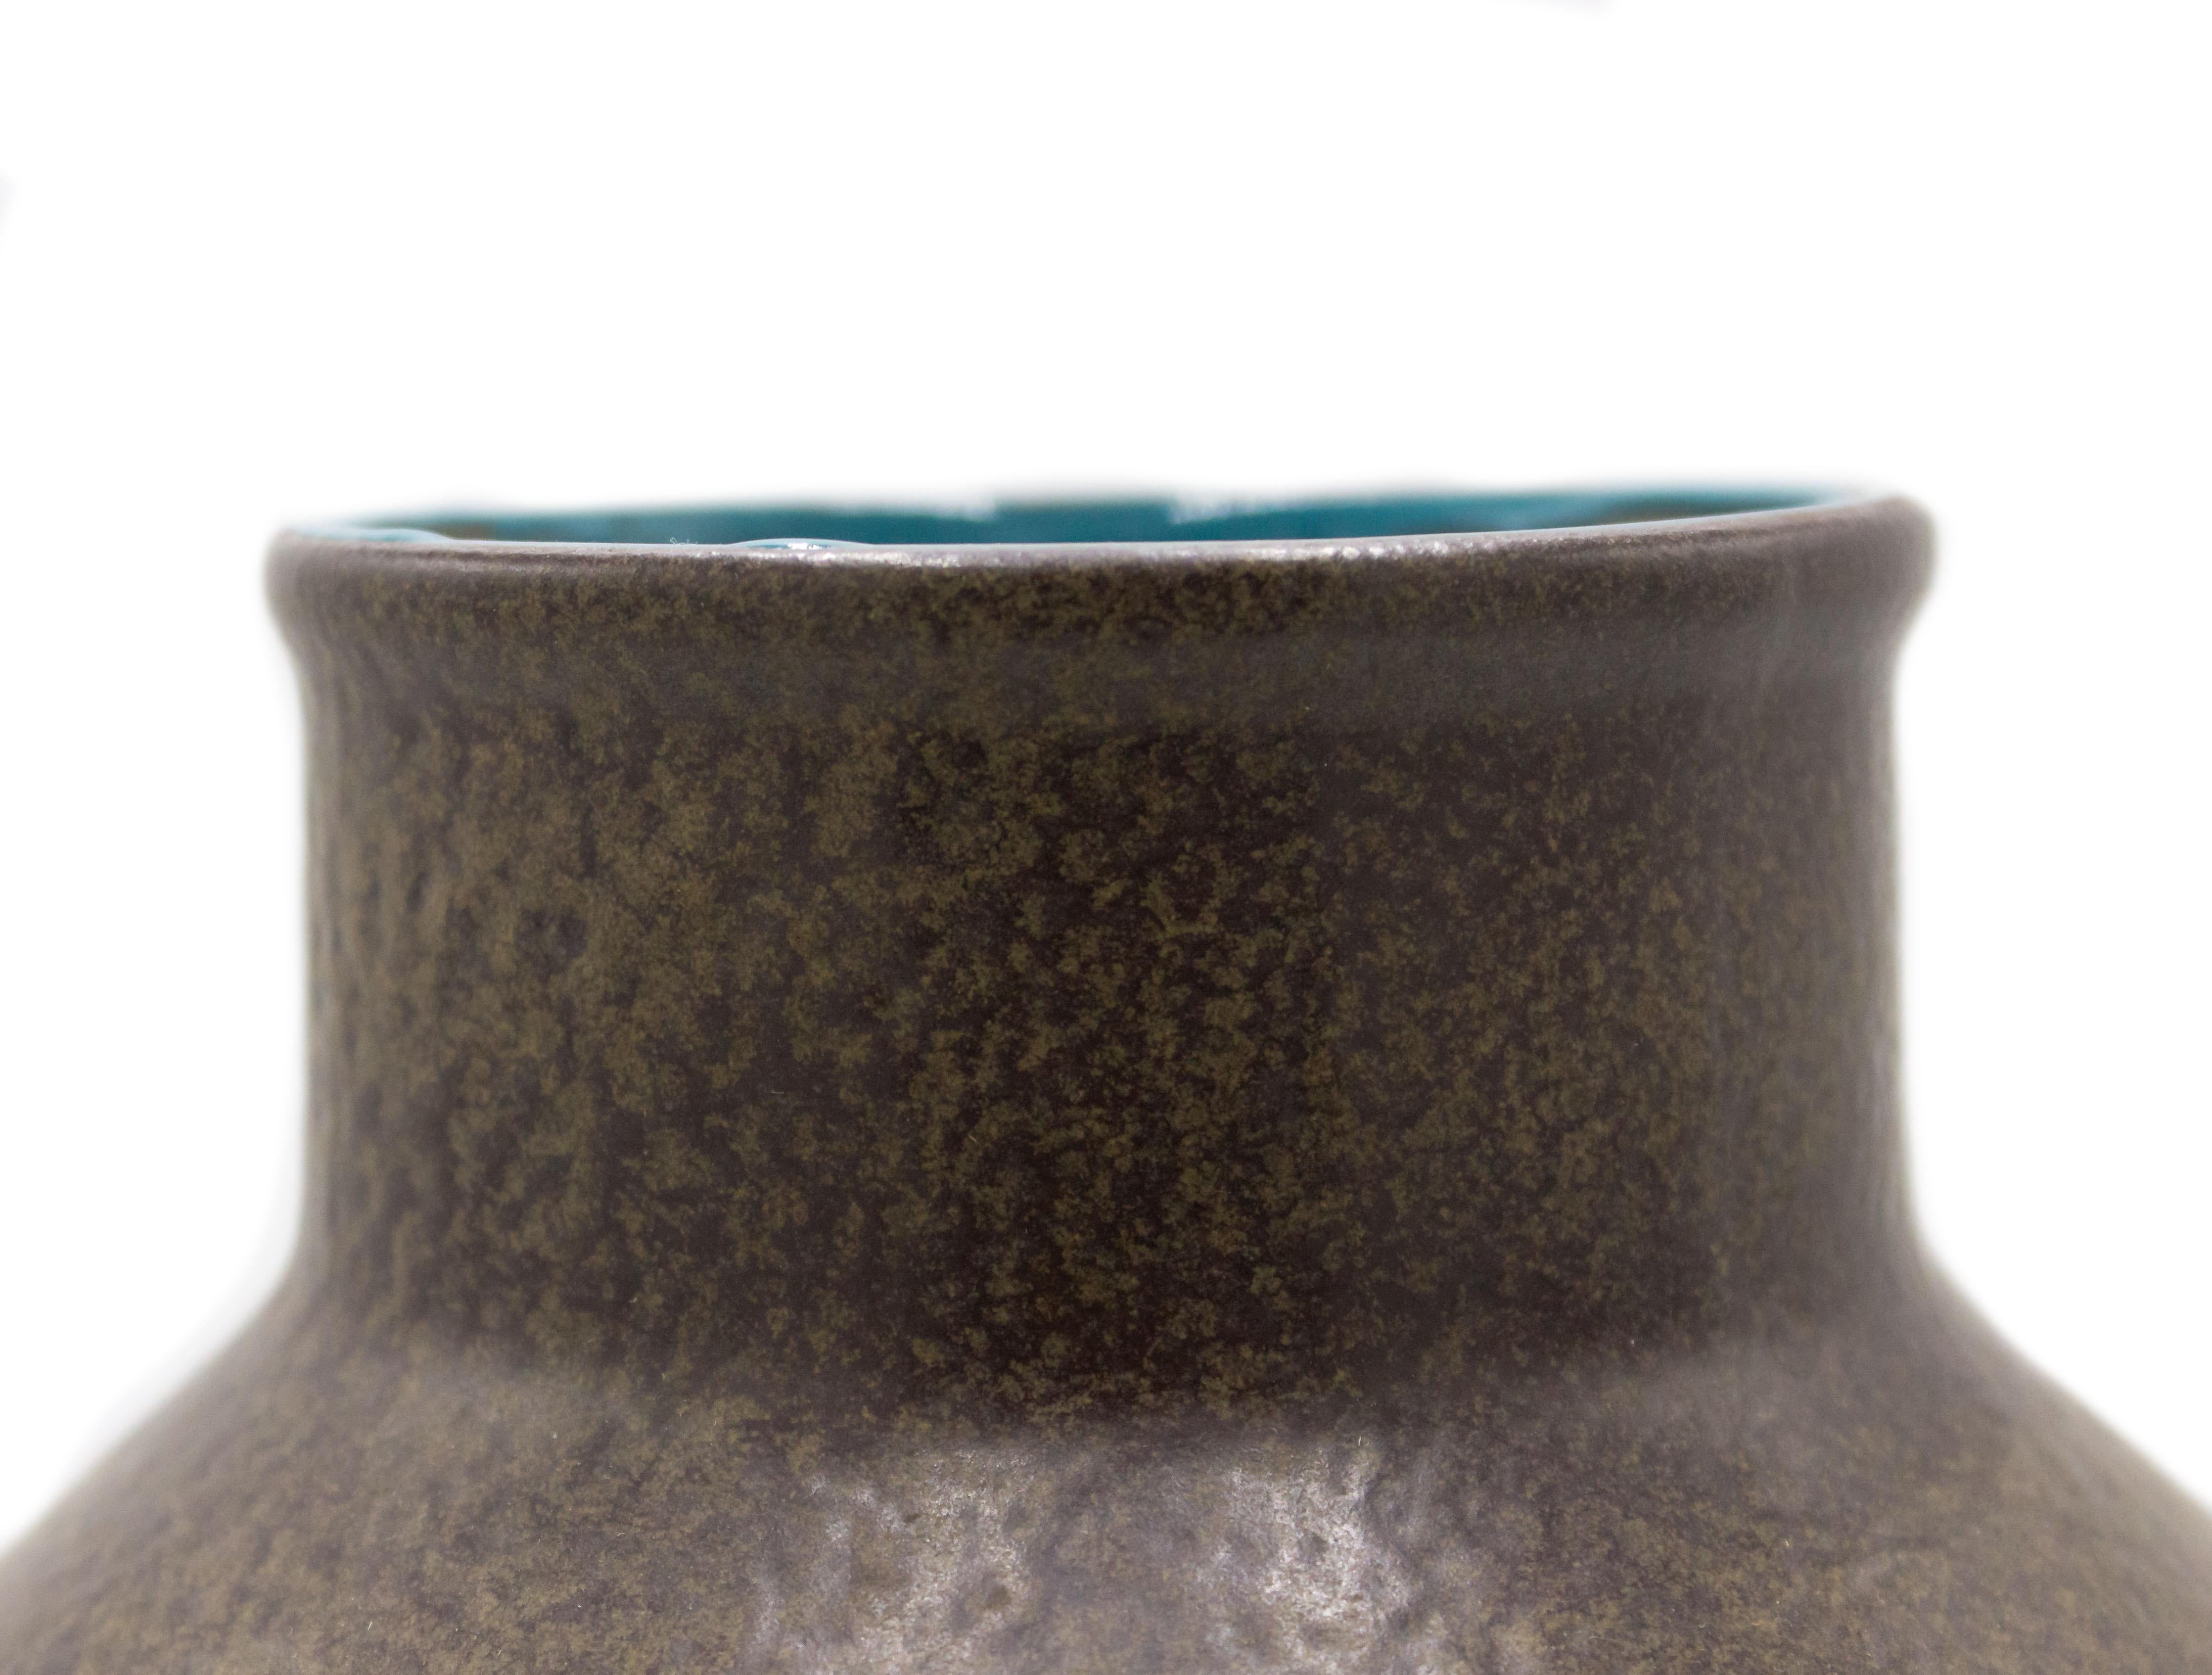 Post-War West Germany brown vase with center banding with geometric white and yellow pumice textured shapes.
      